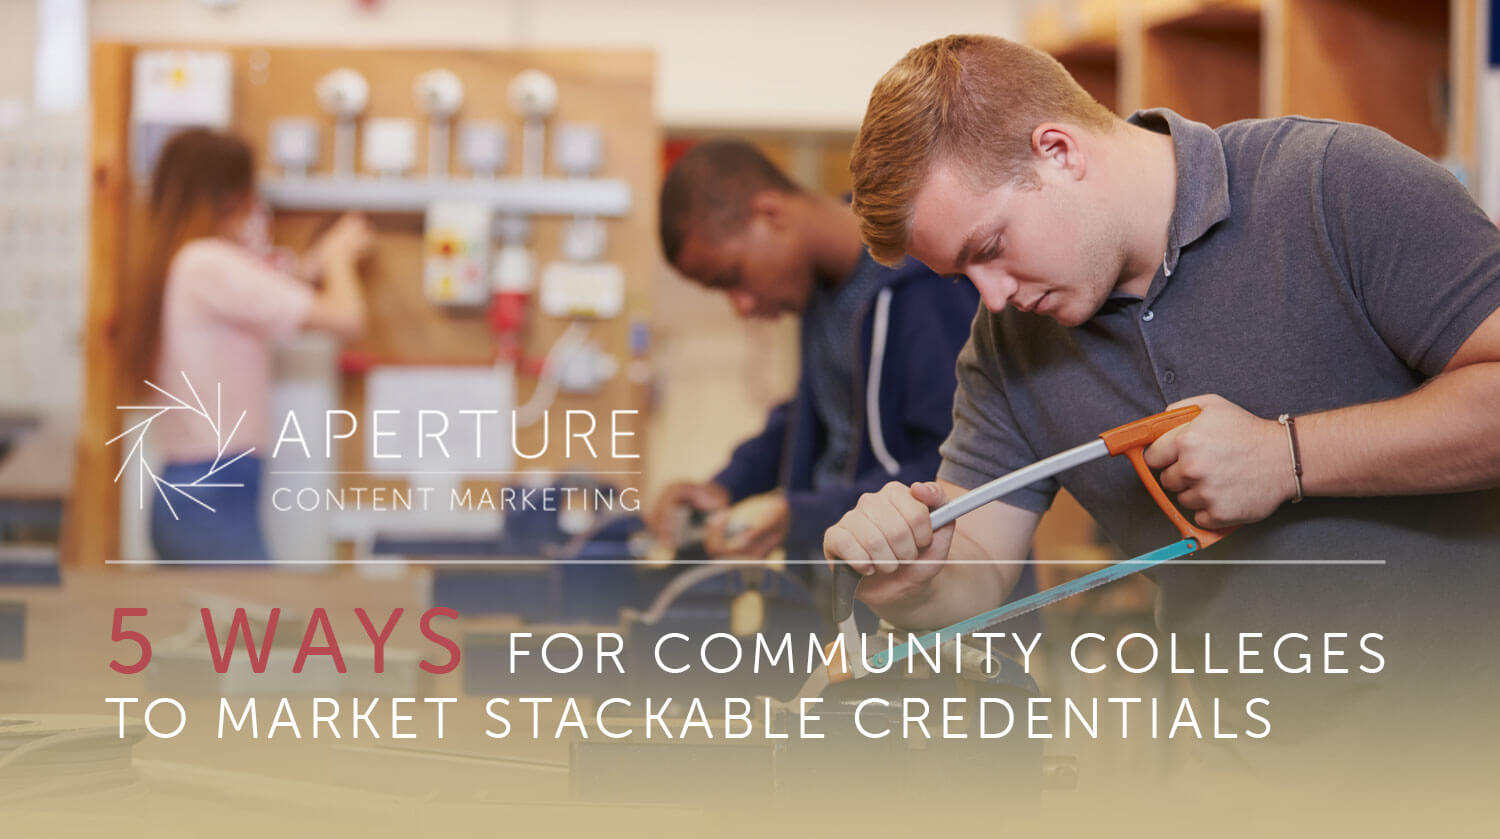 5 Ways for Community Colleges to Market Stackable Credentials